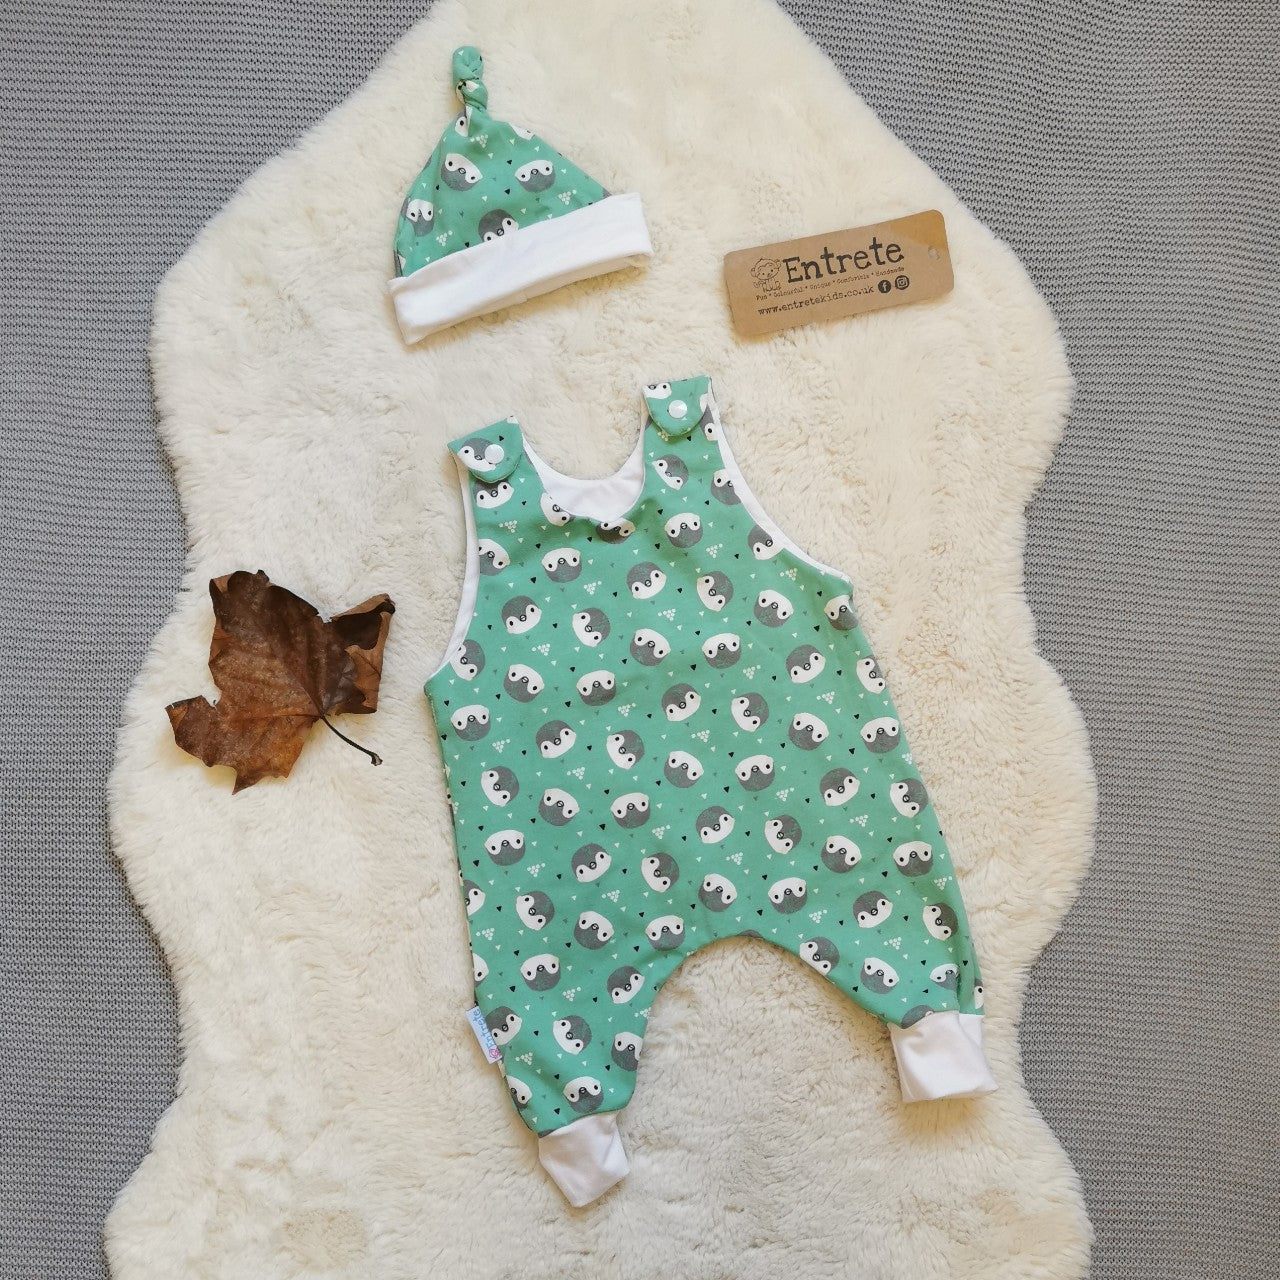 A romper gift set shown in mint penguins for demonstration purposes, your gift set will be handmade using feathers cotton jersey.